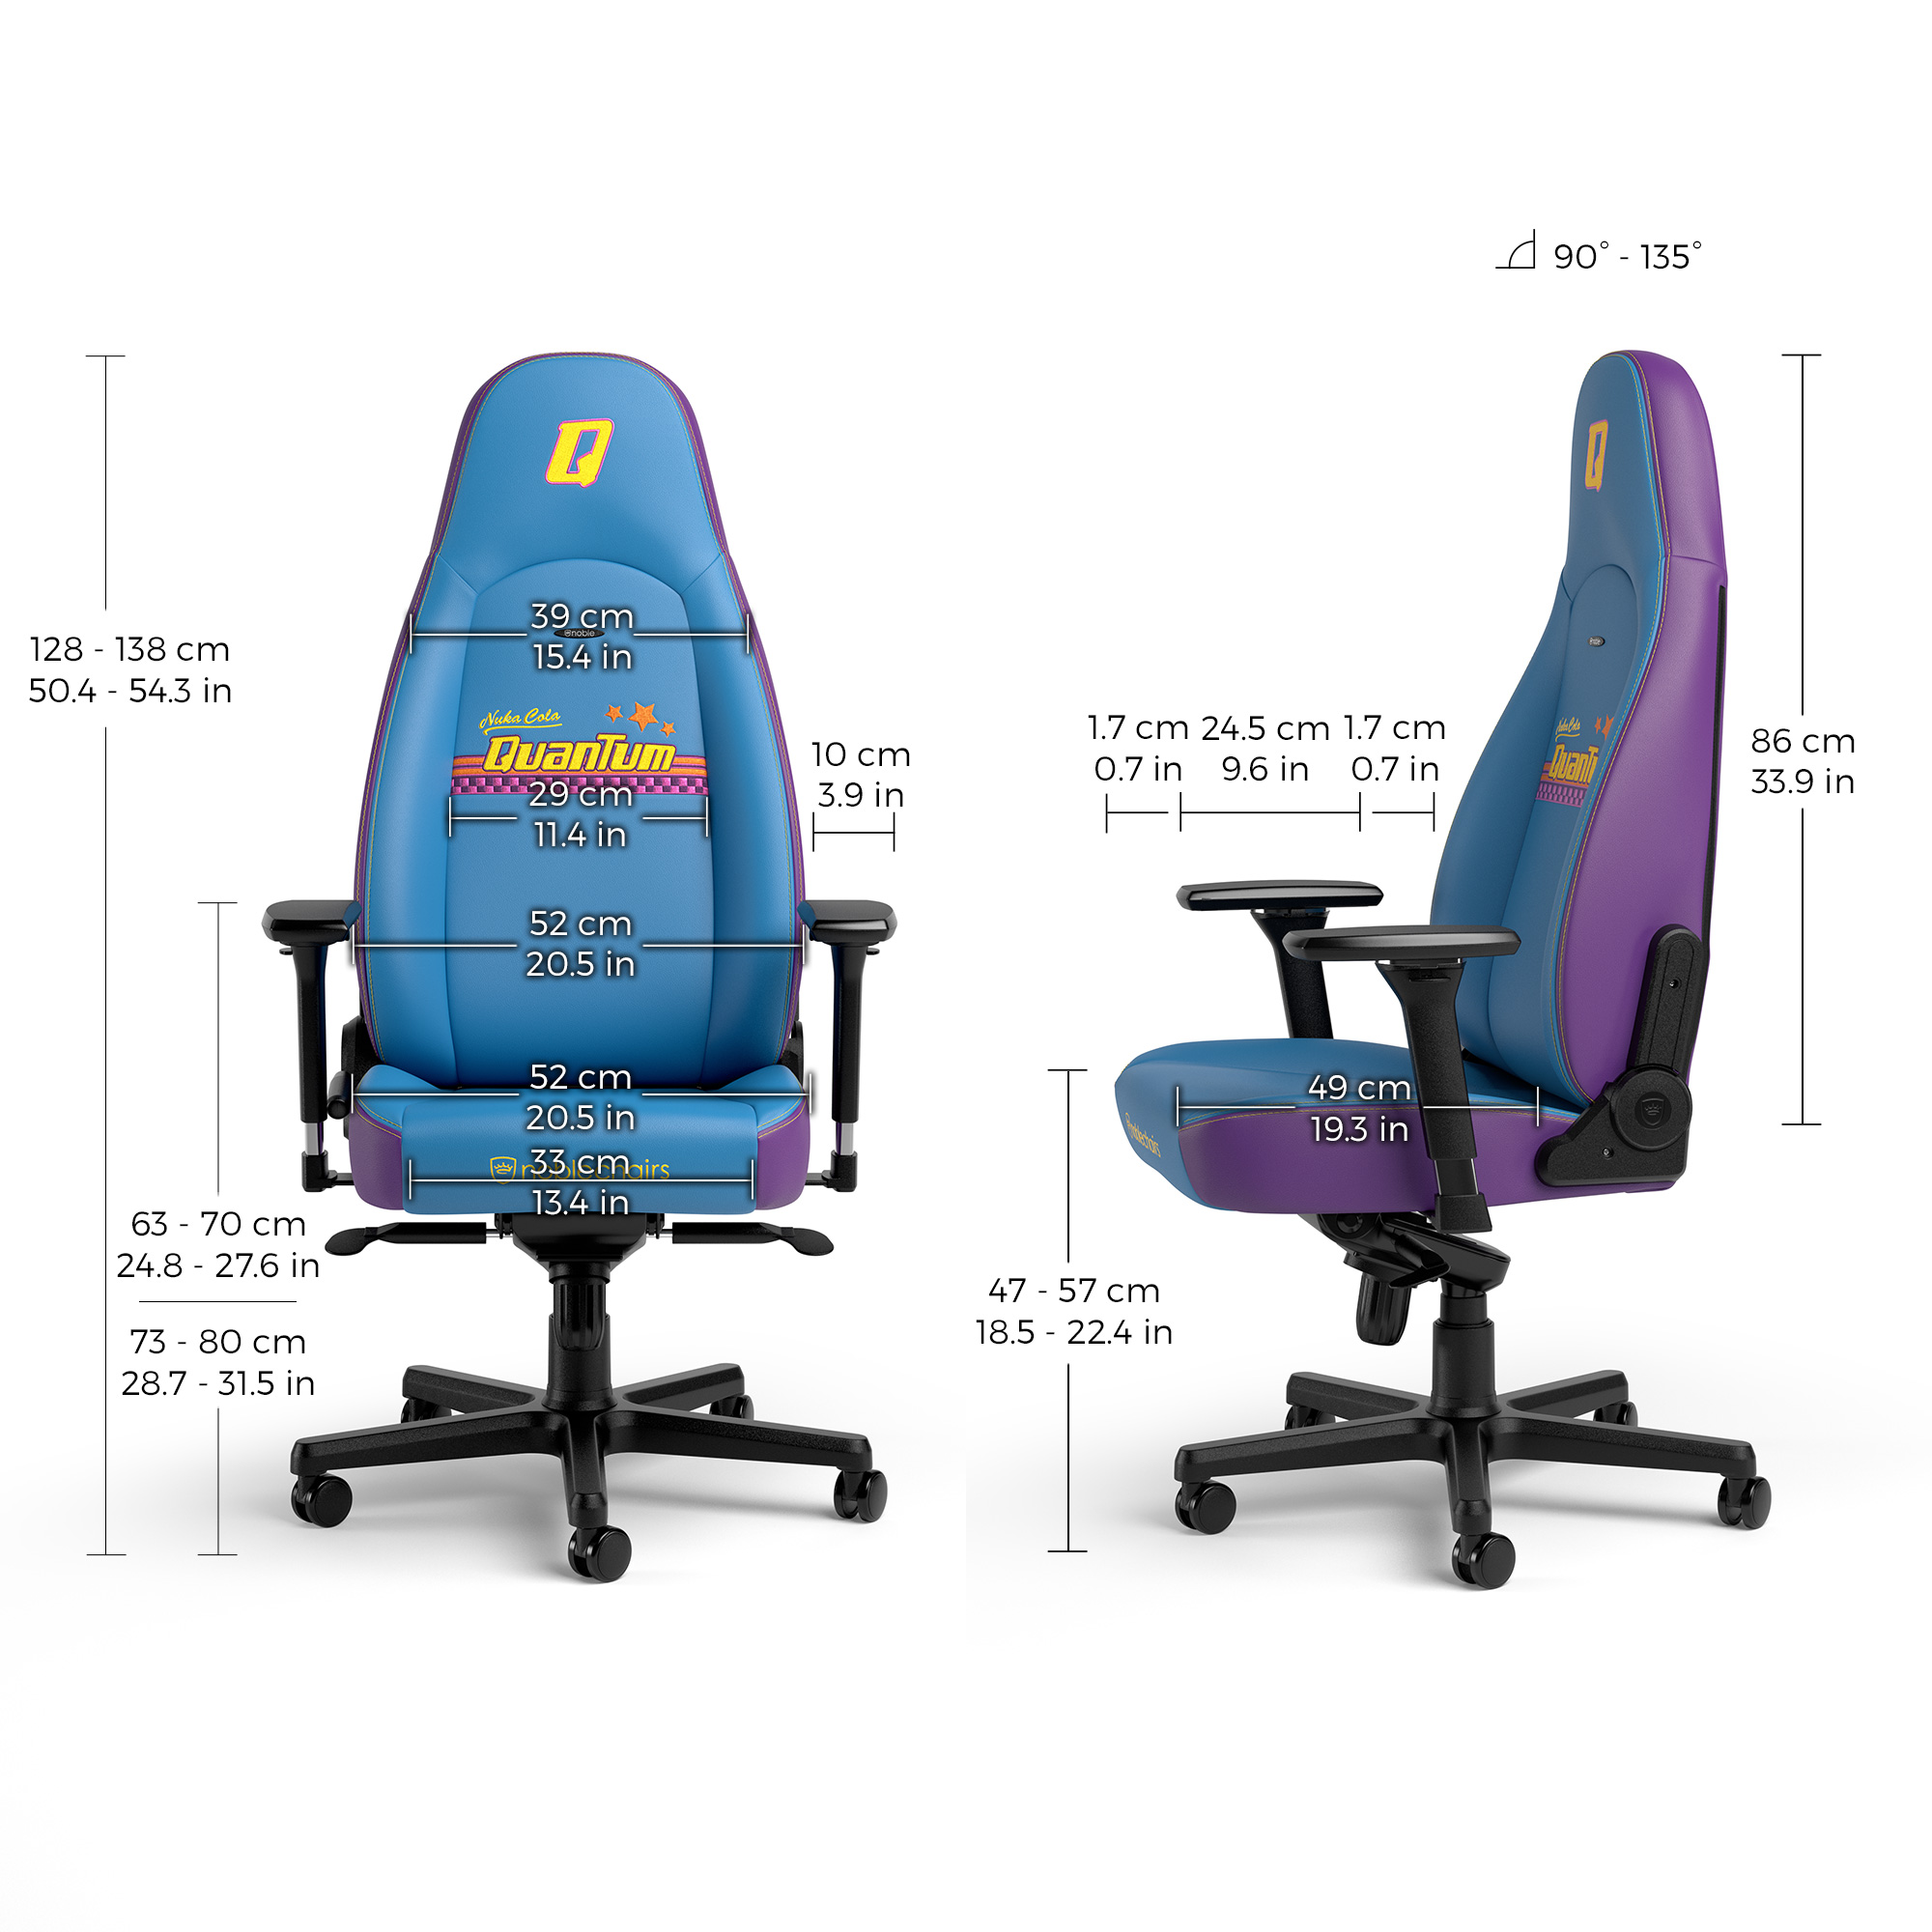 noblechairs ICON Gaming Chair Fallout Nuka-Cola Quantum Edition